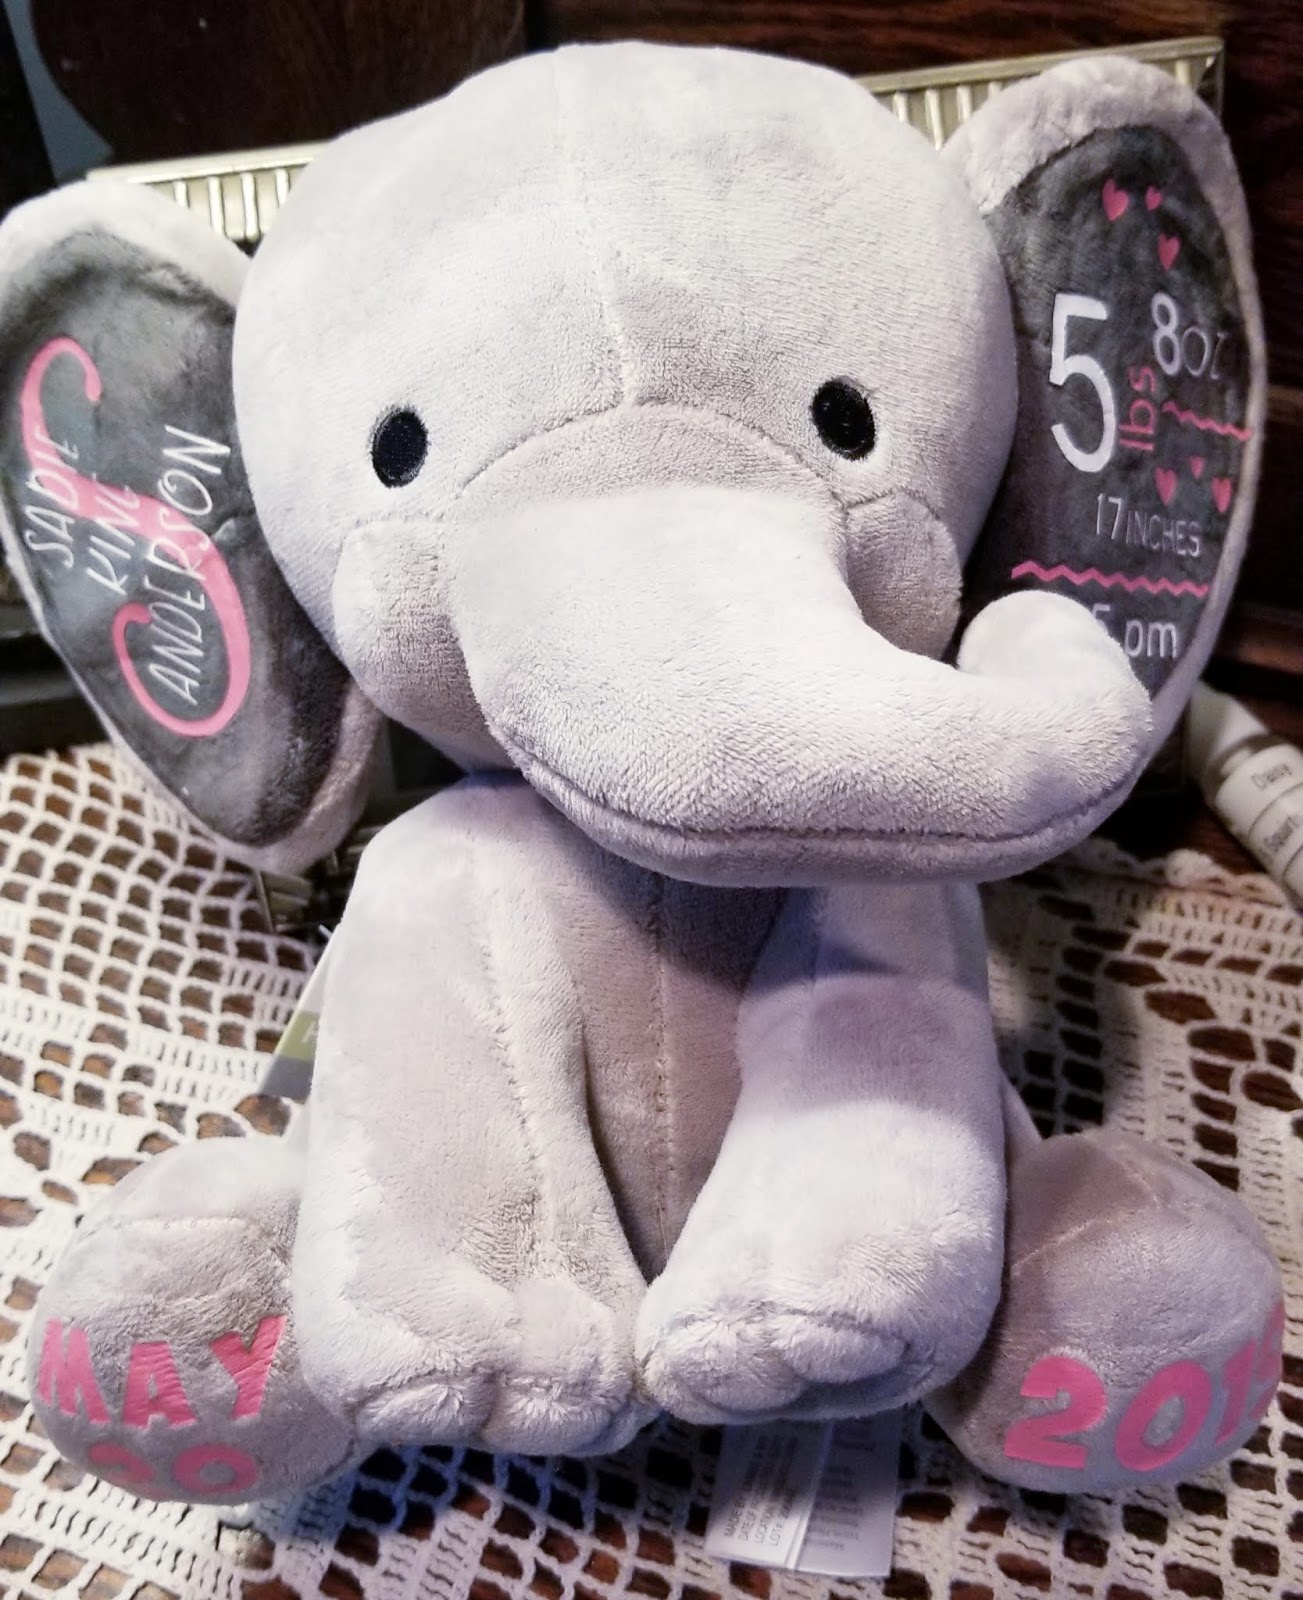 Download Elephant Birth Stats A Cricut Step By Step Tutorial